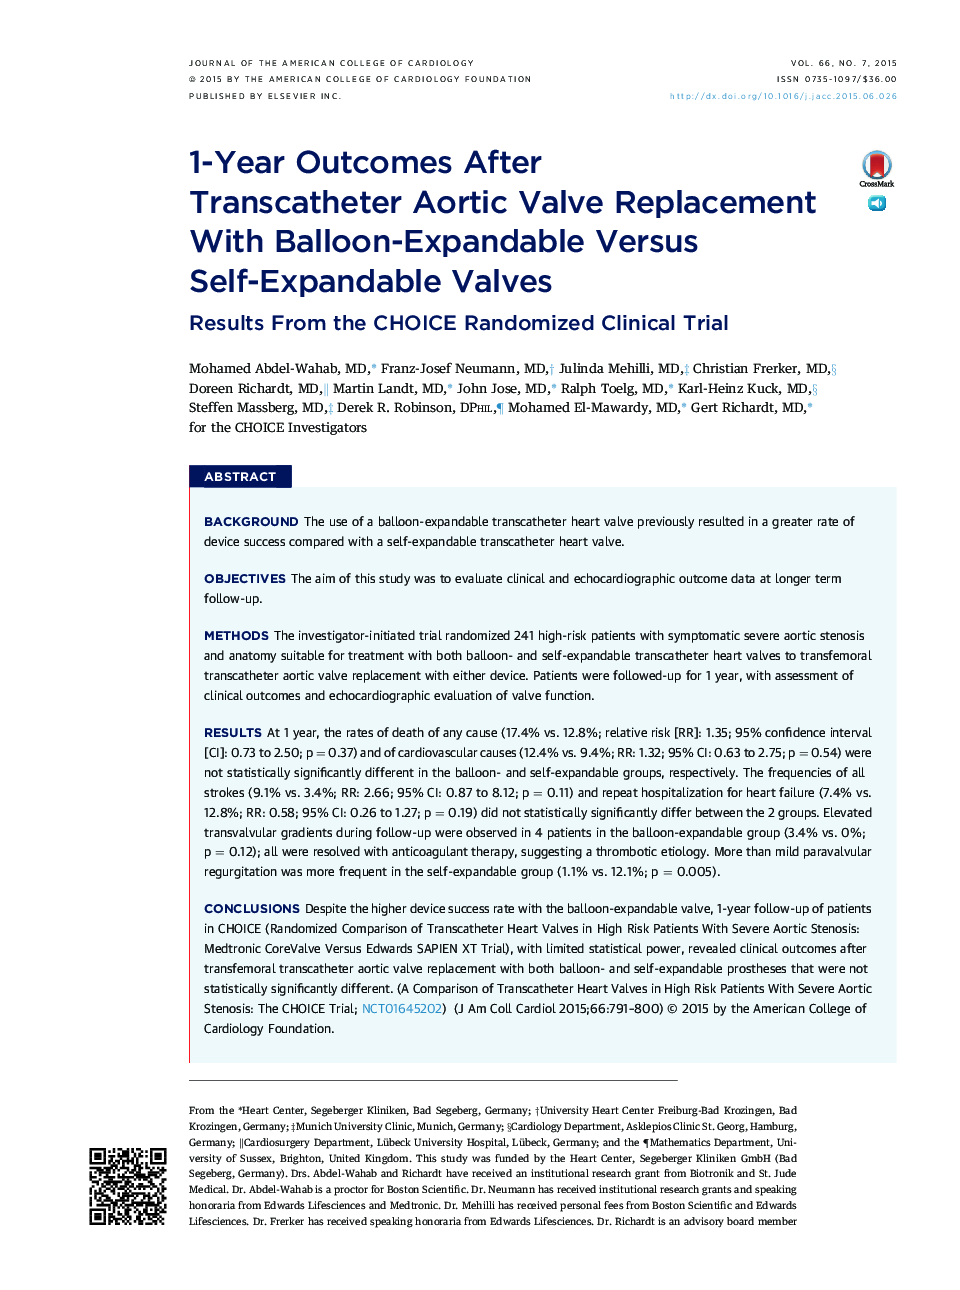 1-Year Outcomes After TranscatheterÂ Aortic Valve Replacement With Balloon-Expandable Versus Self-Expandable Valves: Results From the CHOICE Randomized Clinical Trial